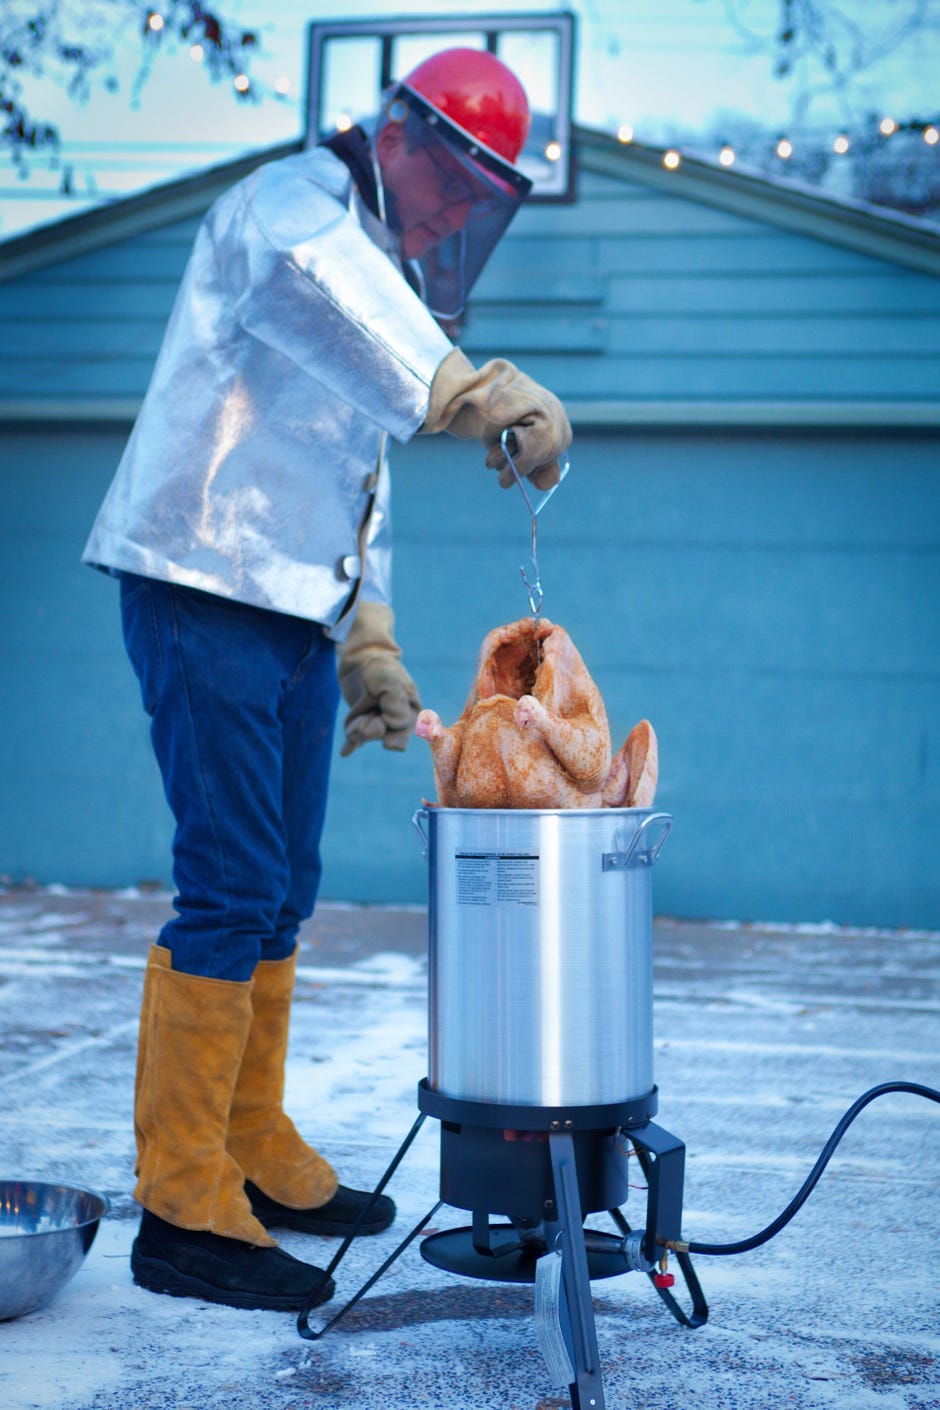 How long to fry a turkey in an oilless fryer Thanksgiving Safety Tips For Deep Frying A Turkey Without Setting Your House On Fire Cnet